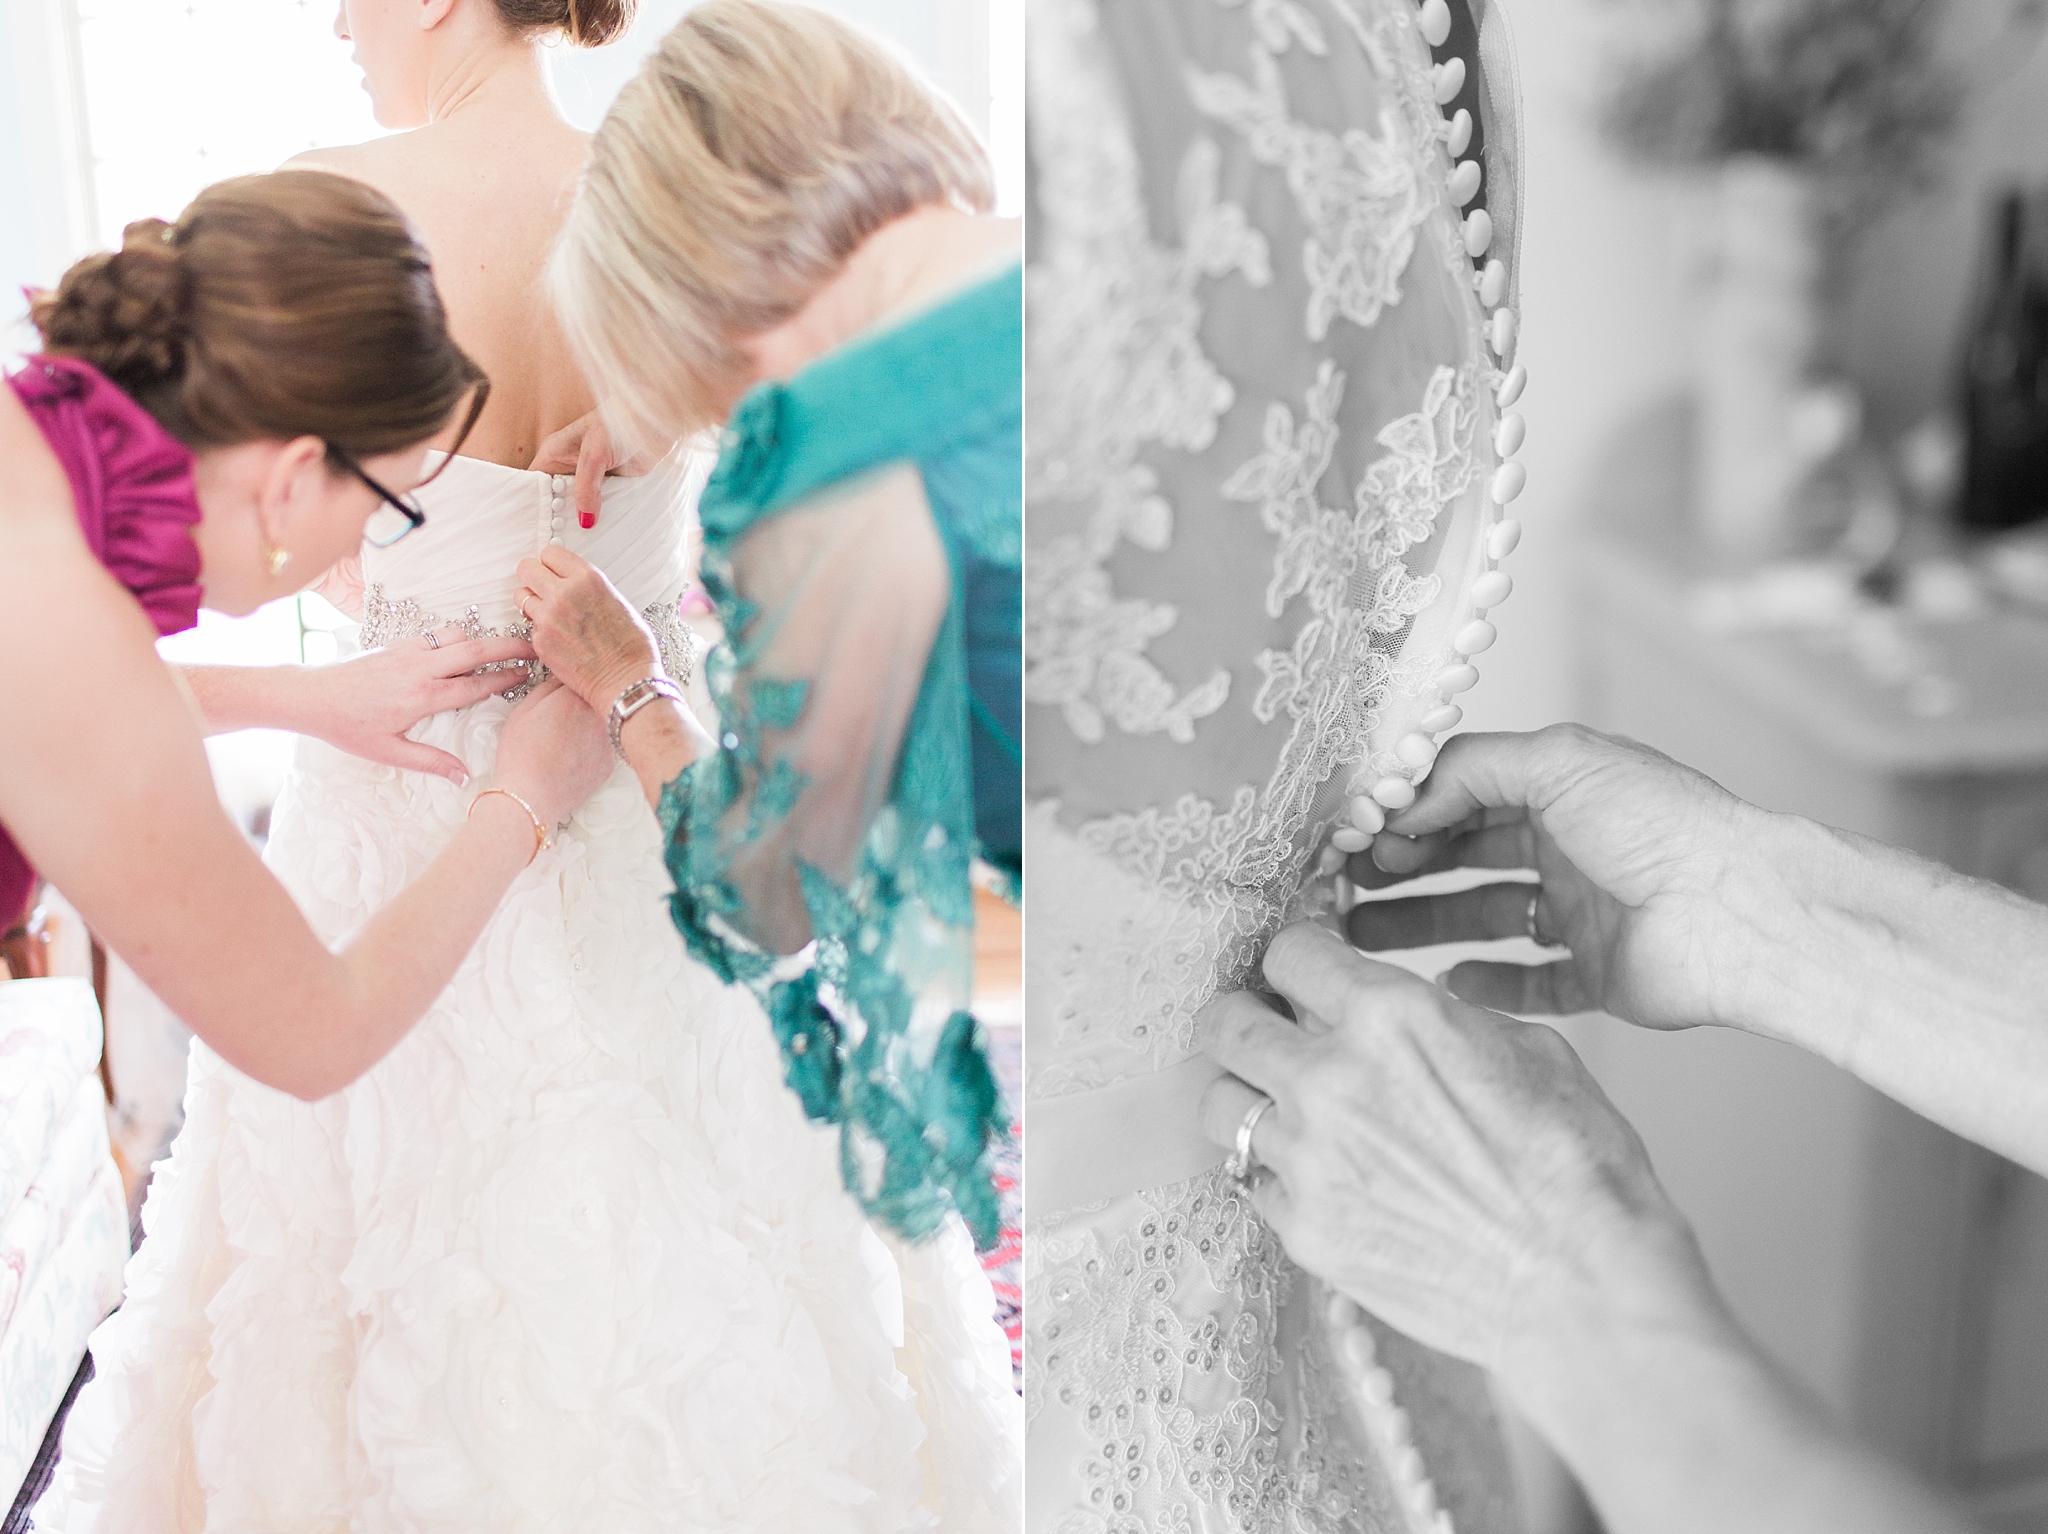 This Washington, DC photographer has picked up a trick or two during her wedding days and is sharing one small secret to help brides with their dress buttons!